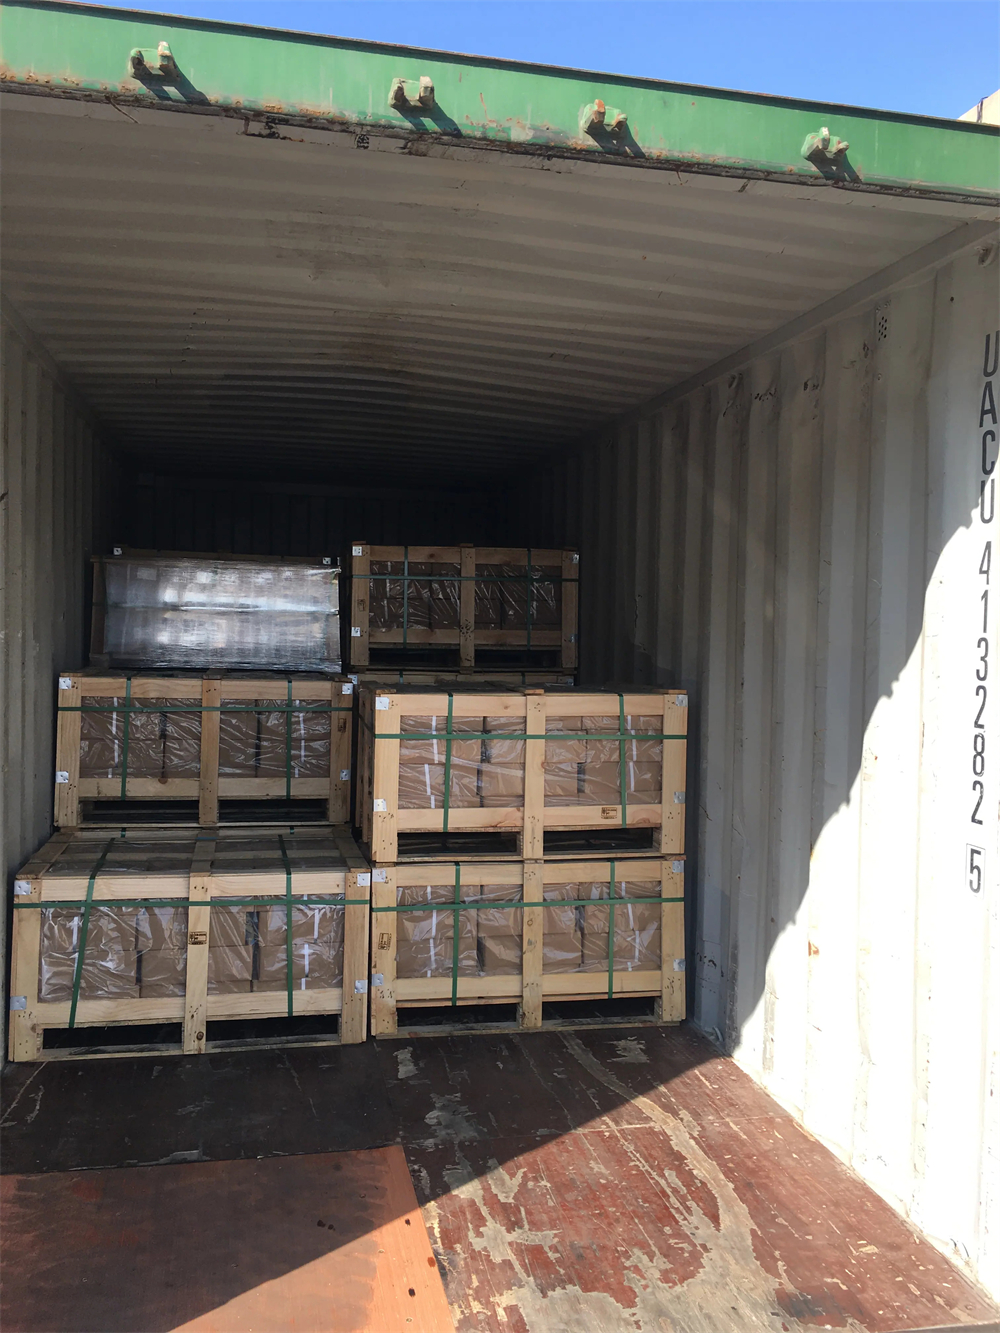 shipment by container